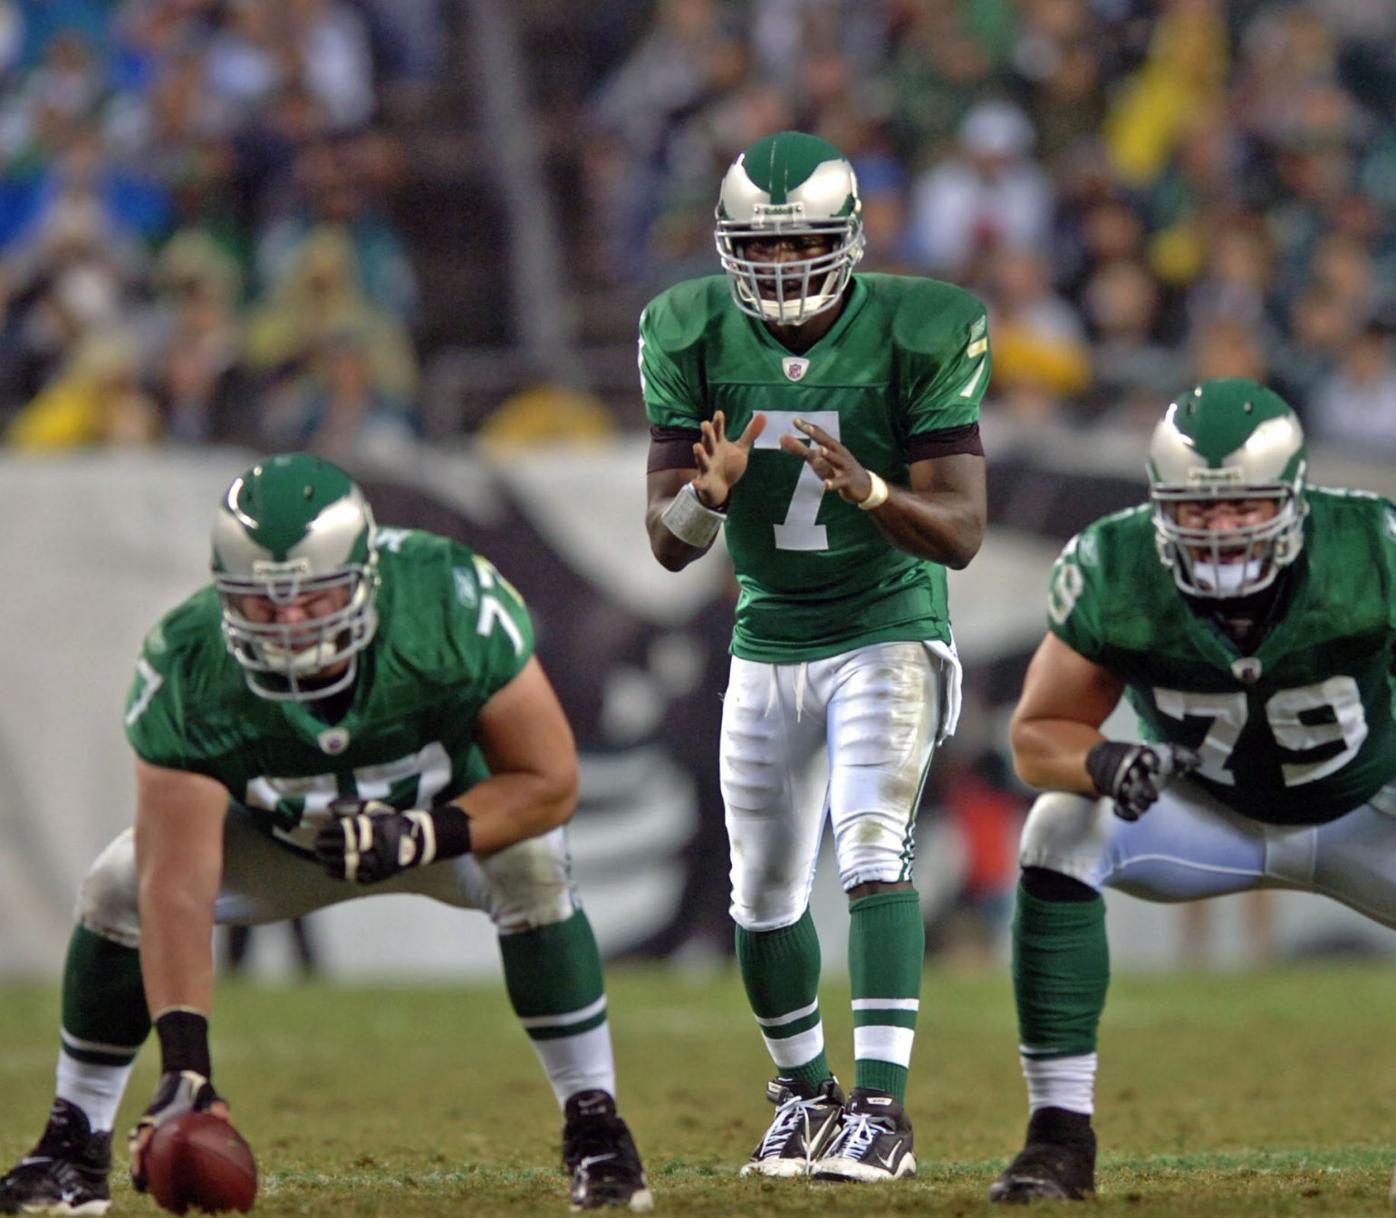 Here is when the Philadelphia Eagles will wear Kelly green this